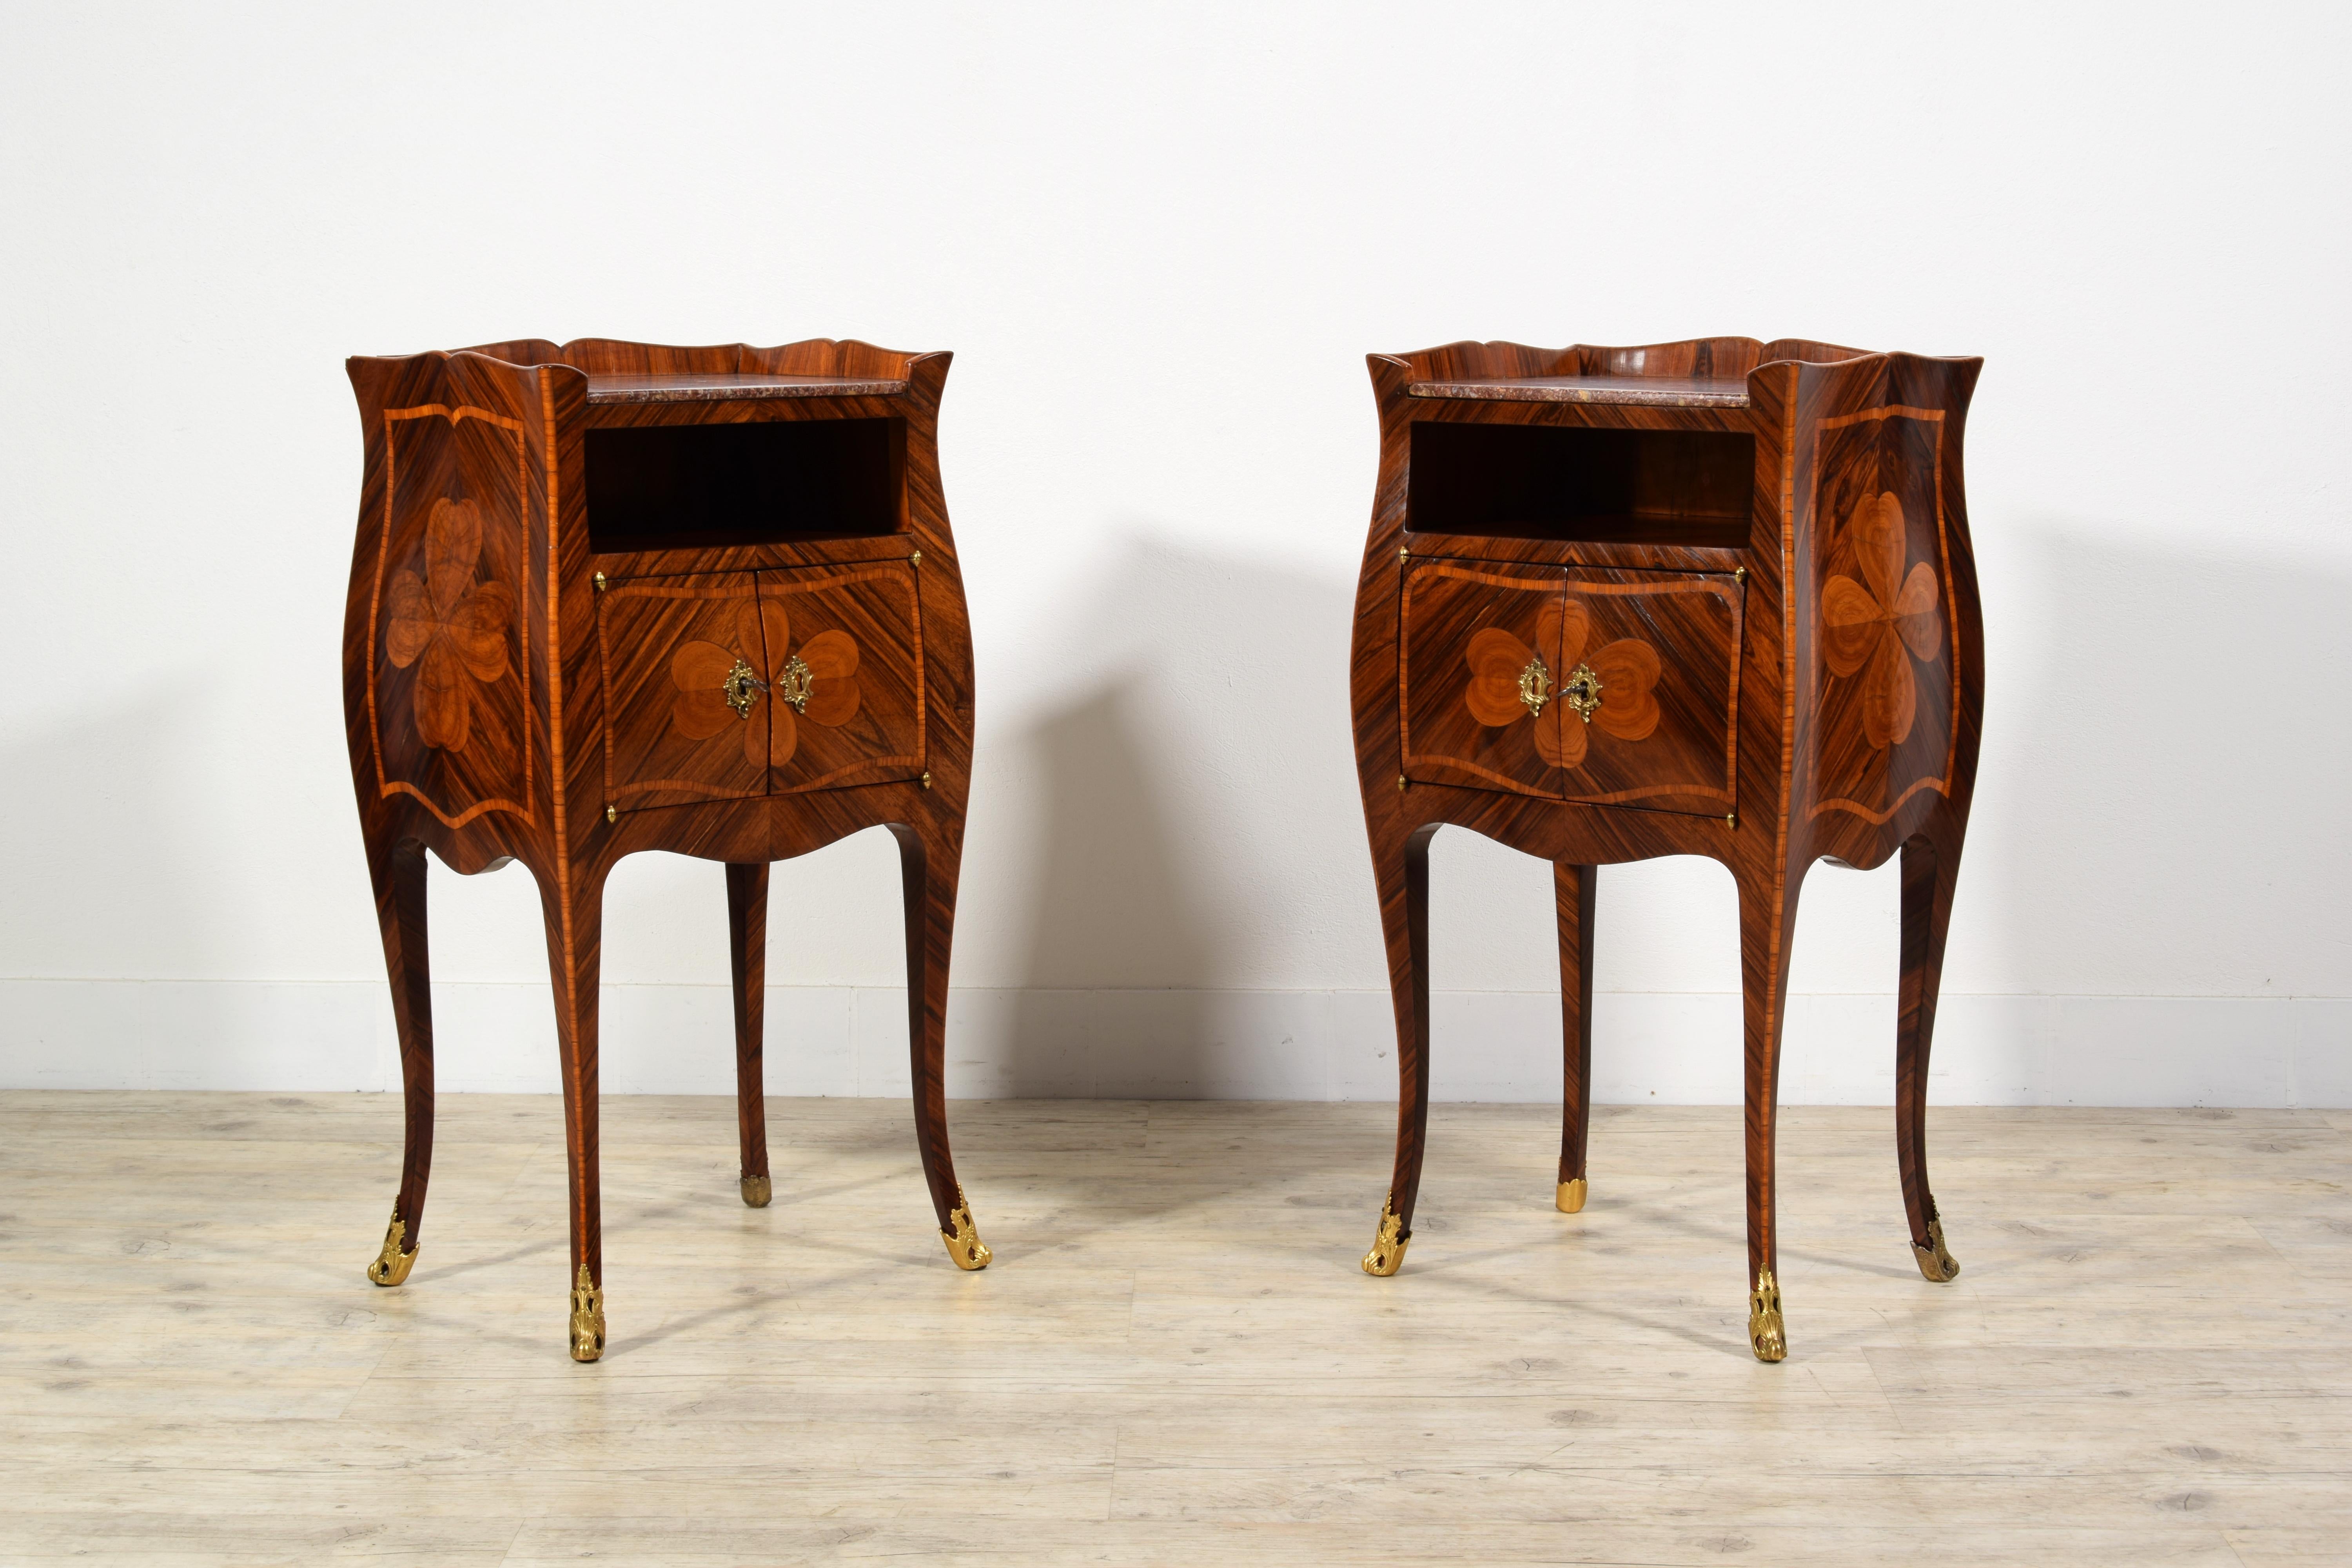 19th Century, Pair of Italian Baroque Style Nightstand or Cabinets 

This refined pair of bedside tables, or central cabinets, was made in Genoa (Italy) in the second half of the nineteenth century, in the characteristic style of the Genoese Baroque